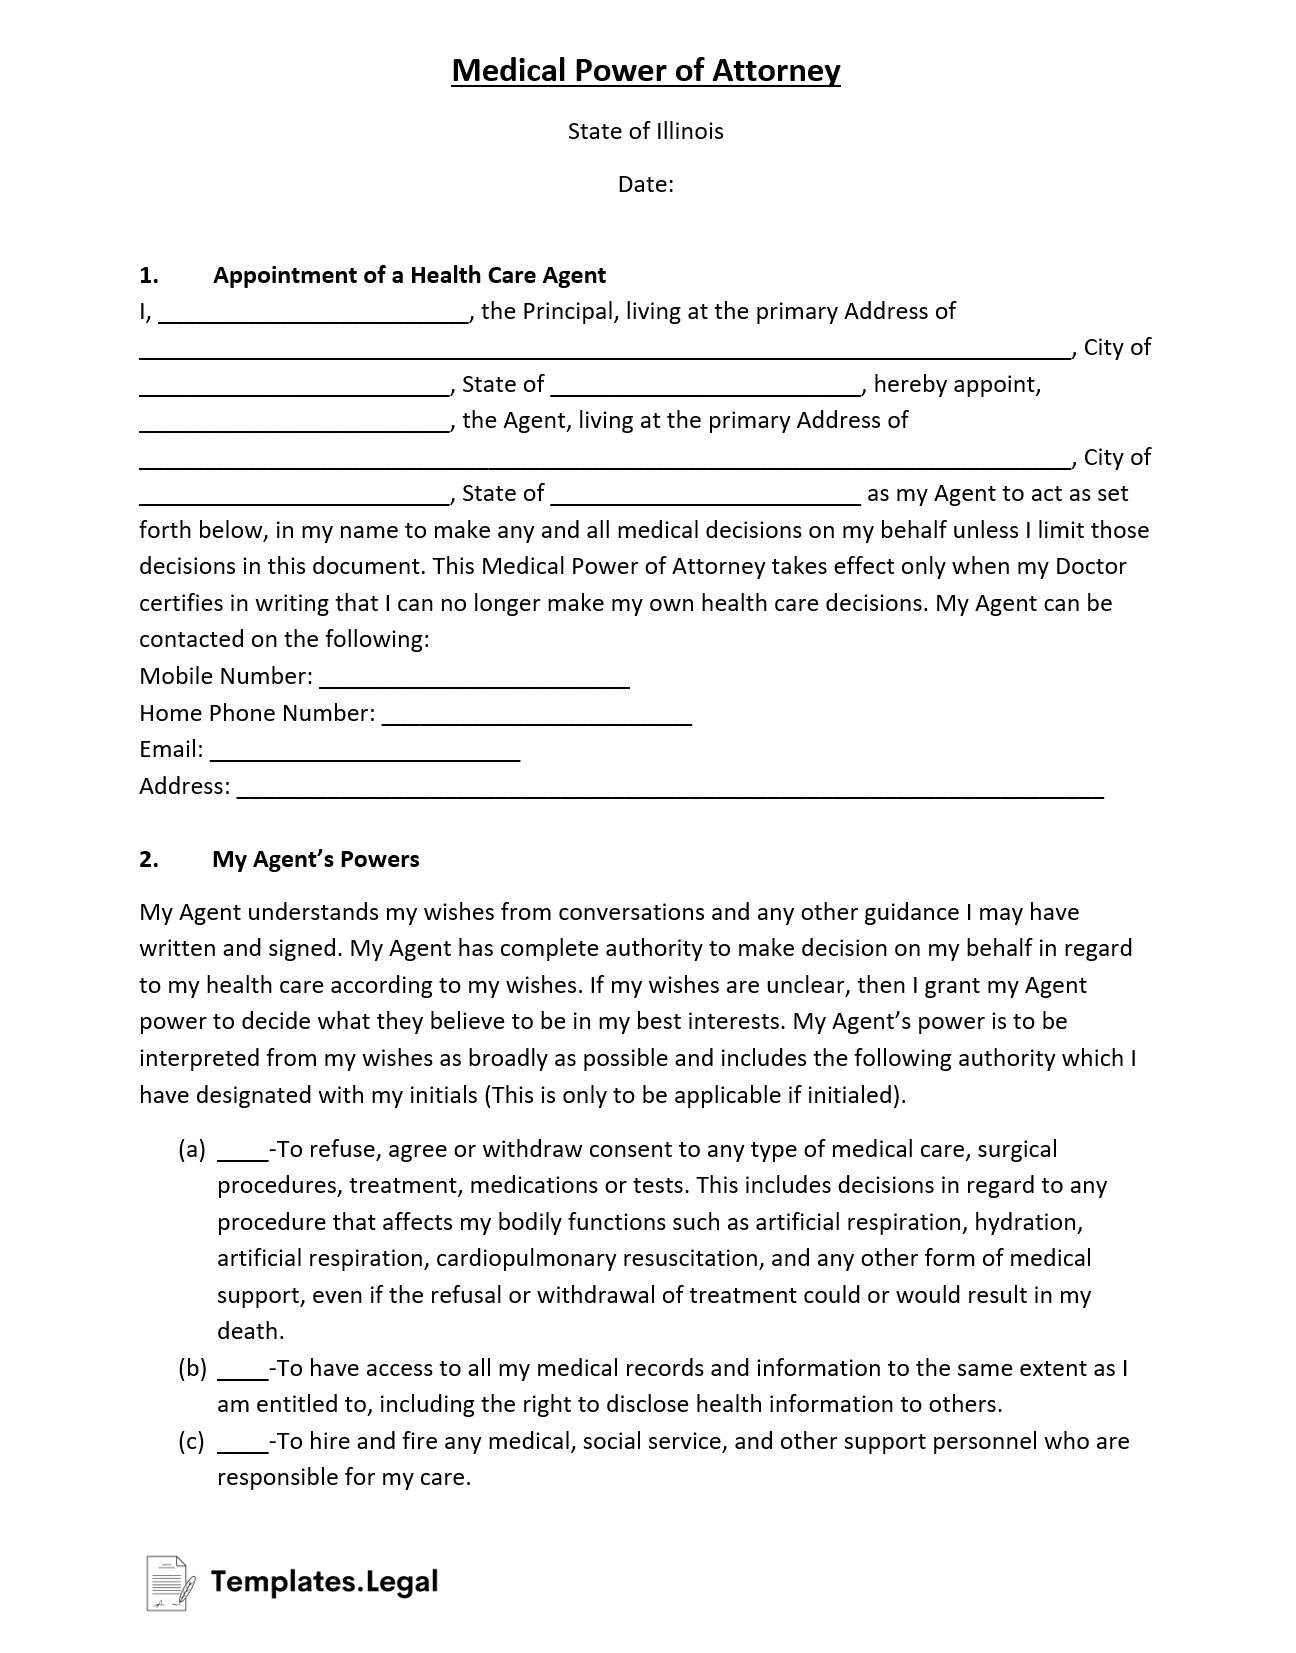 Illinois Medical Power of Attorney- Templates.Legal